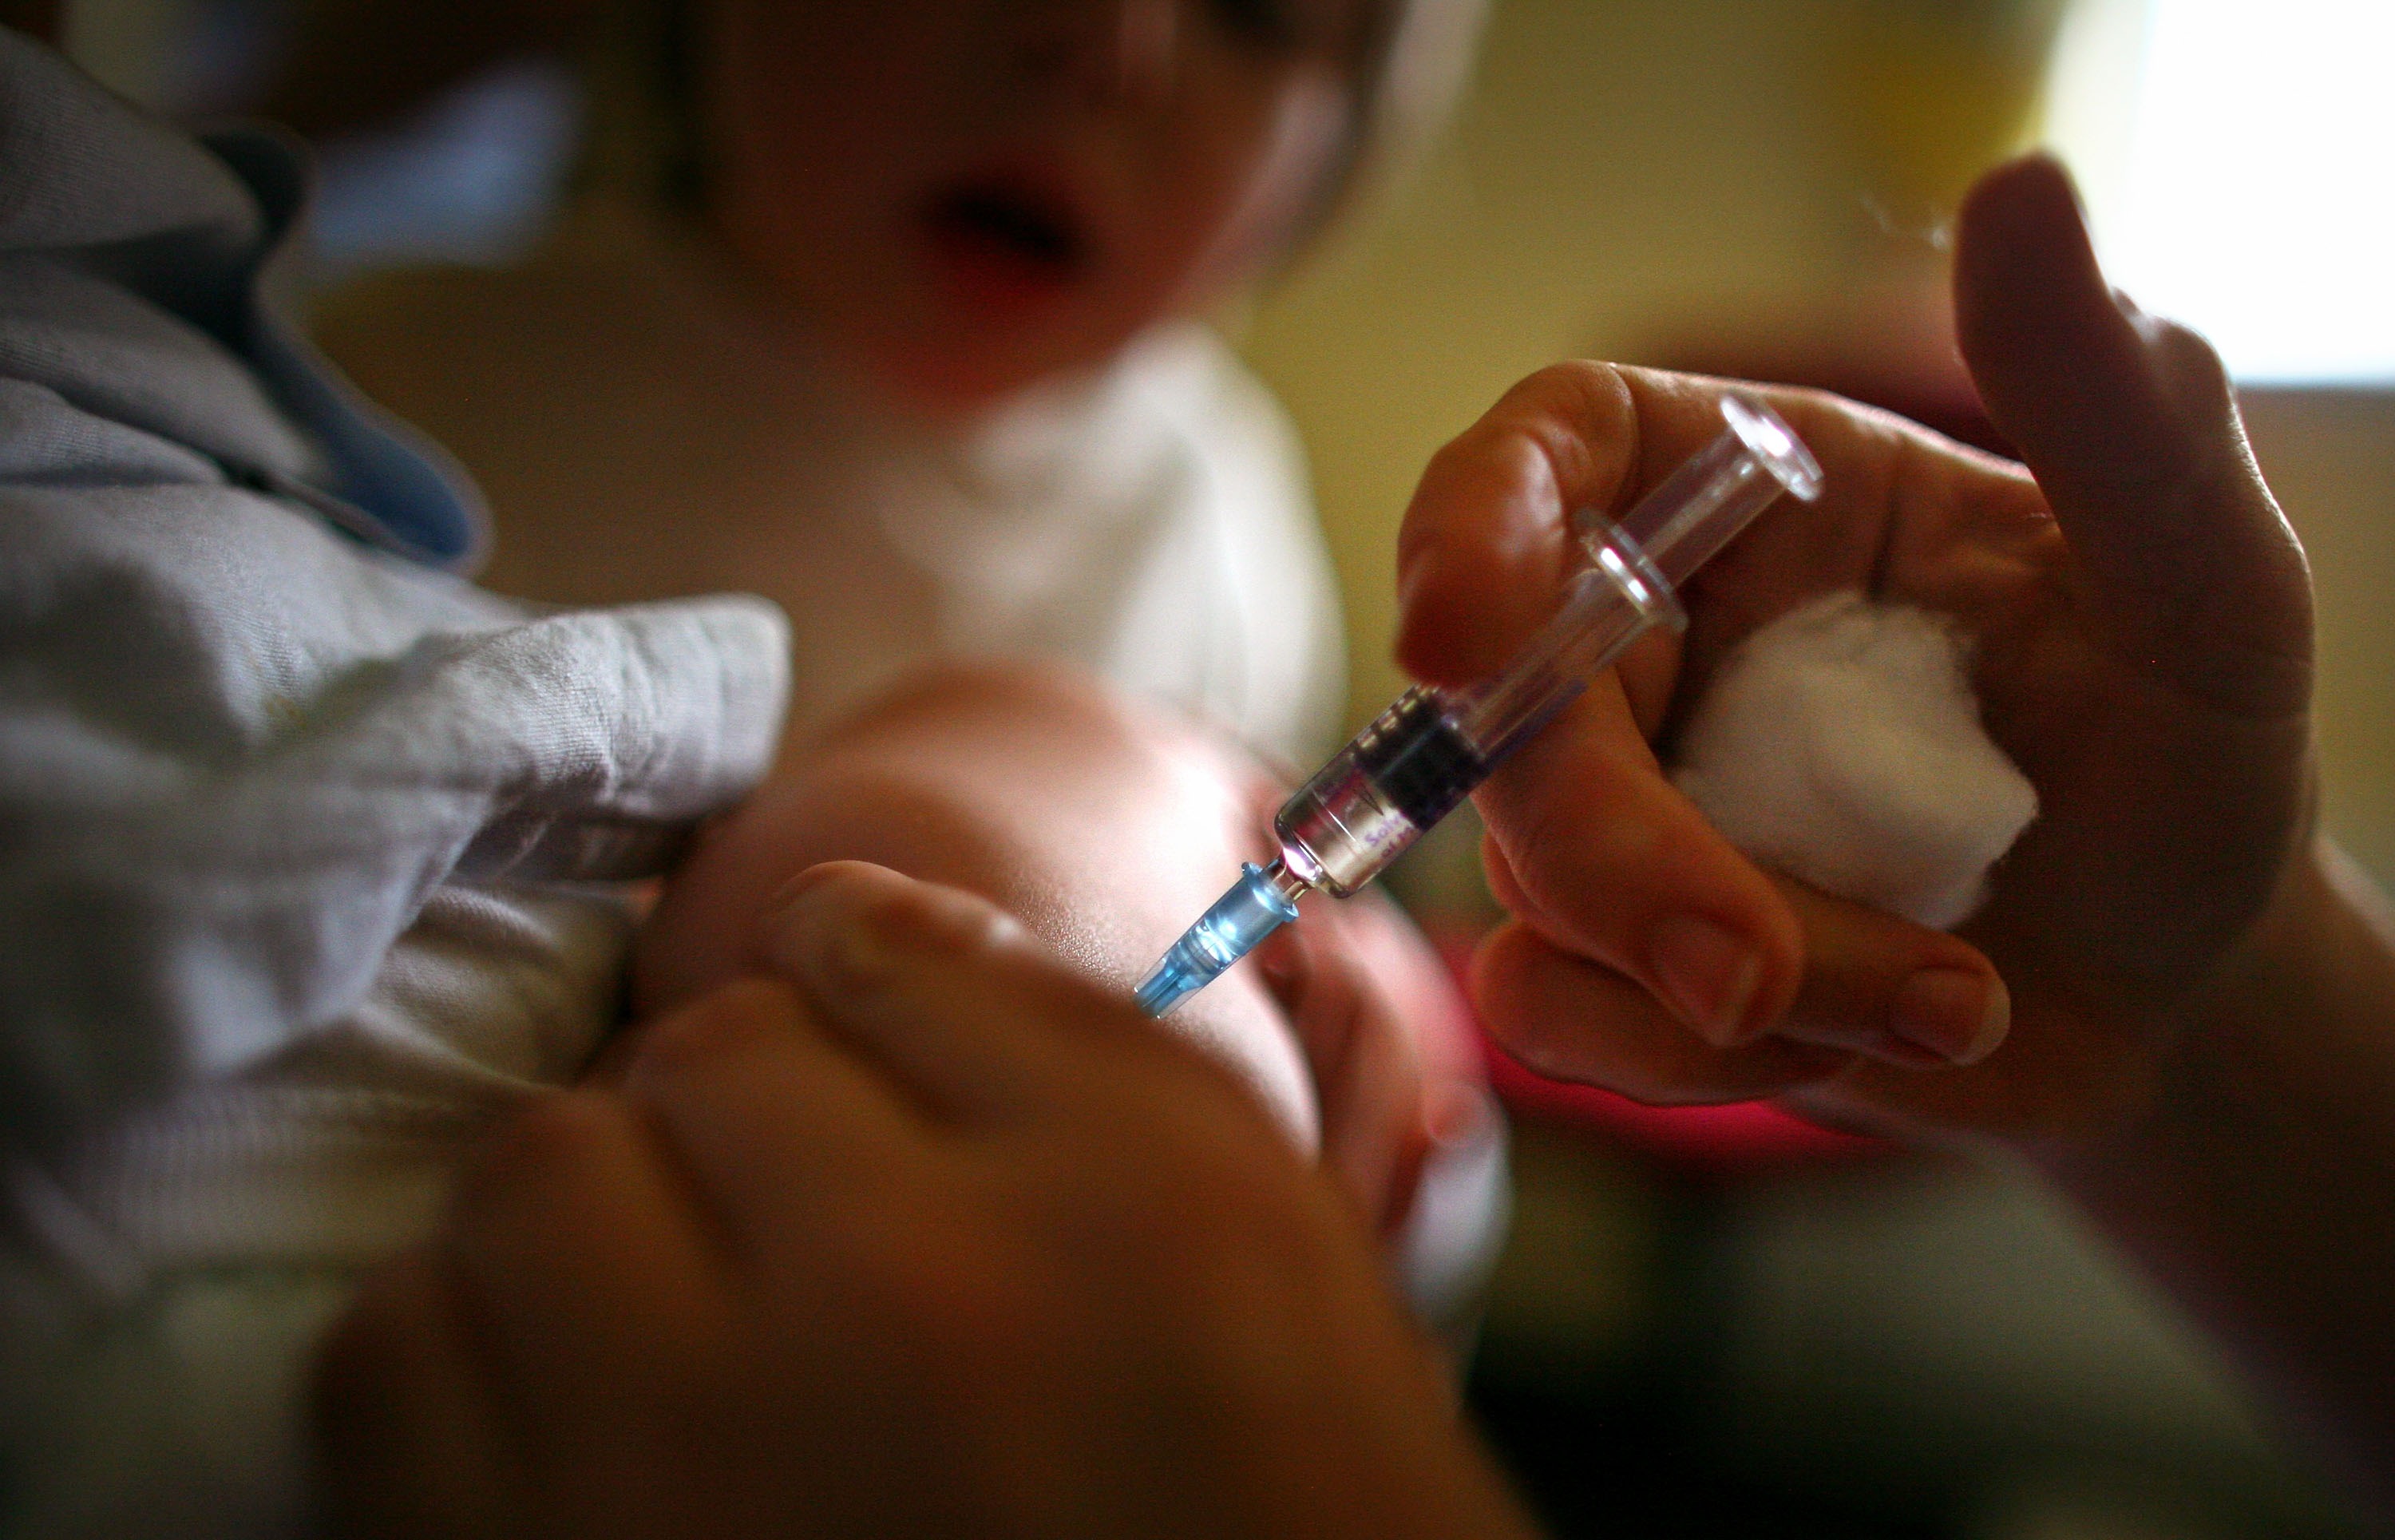 A young boy receives a immunization jab at a health centre in Glasgow September 3, 2007 ... (Photo by Jeff J Mitchell/Getty Images)